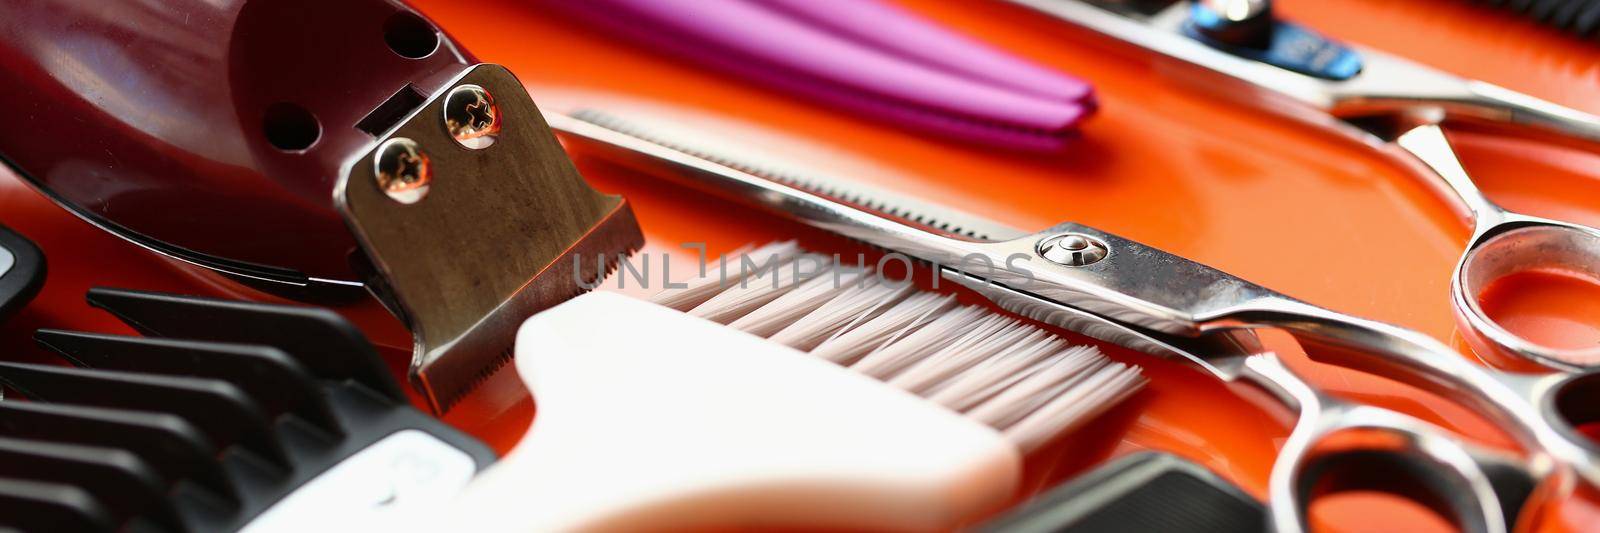 Set of accessories for work of hairdressers by kuprevich